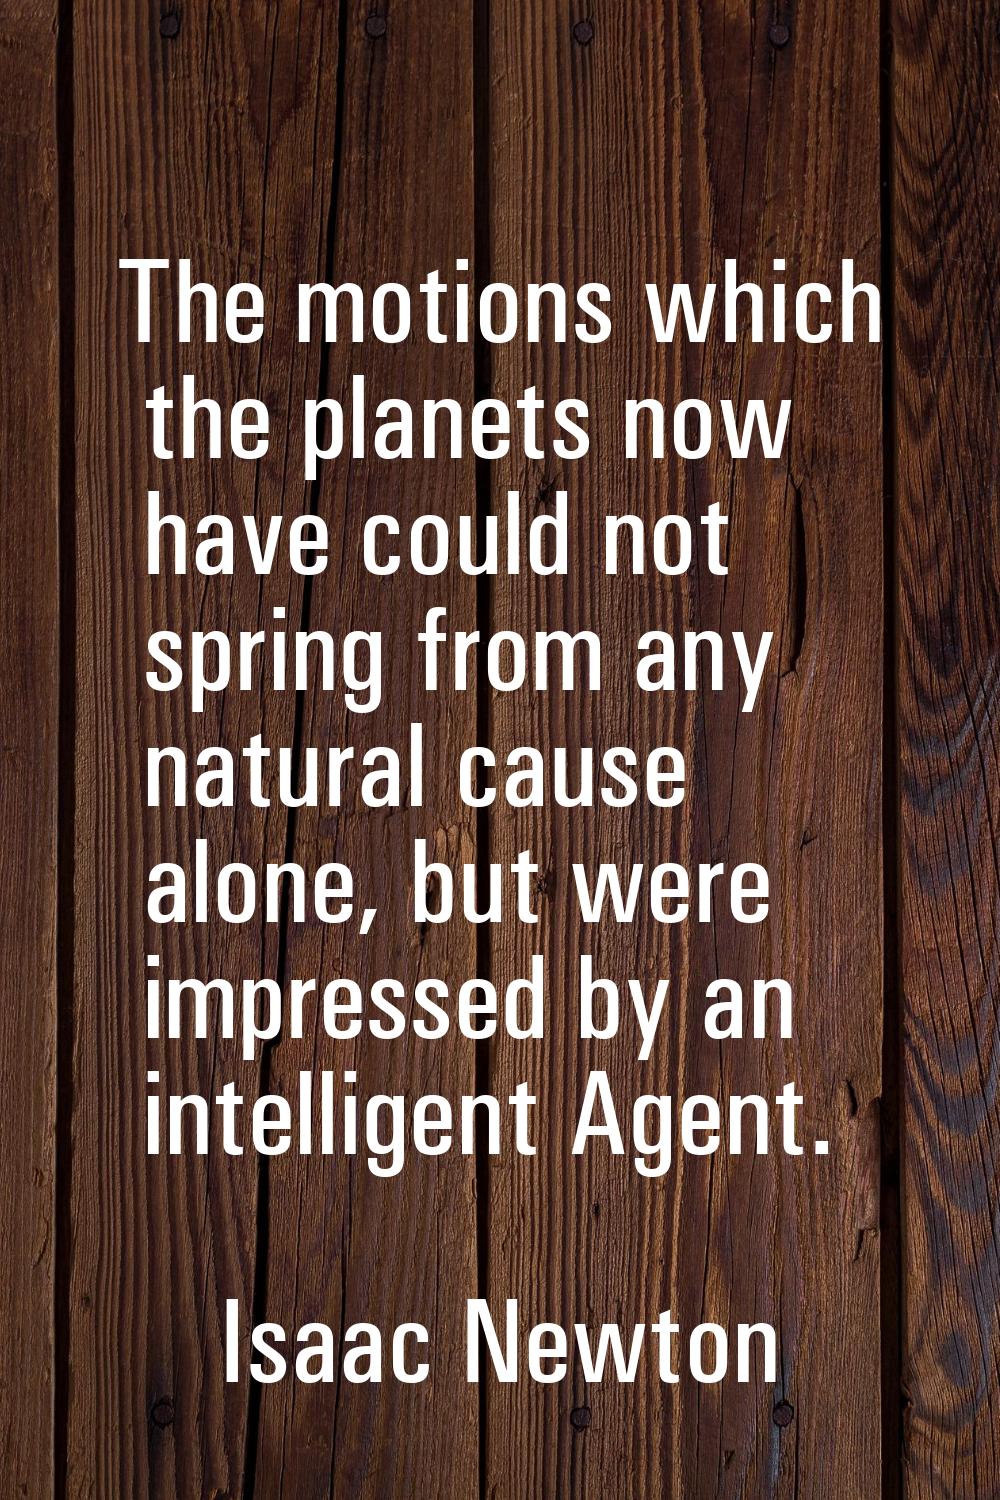 The motions which the planets now have could not spring from any natural cause alone, but were impr